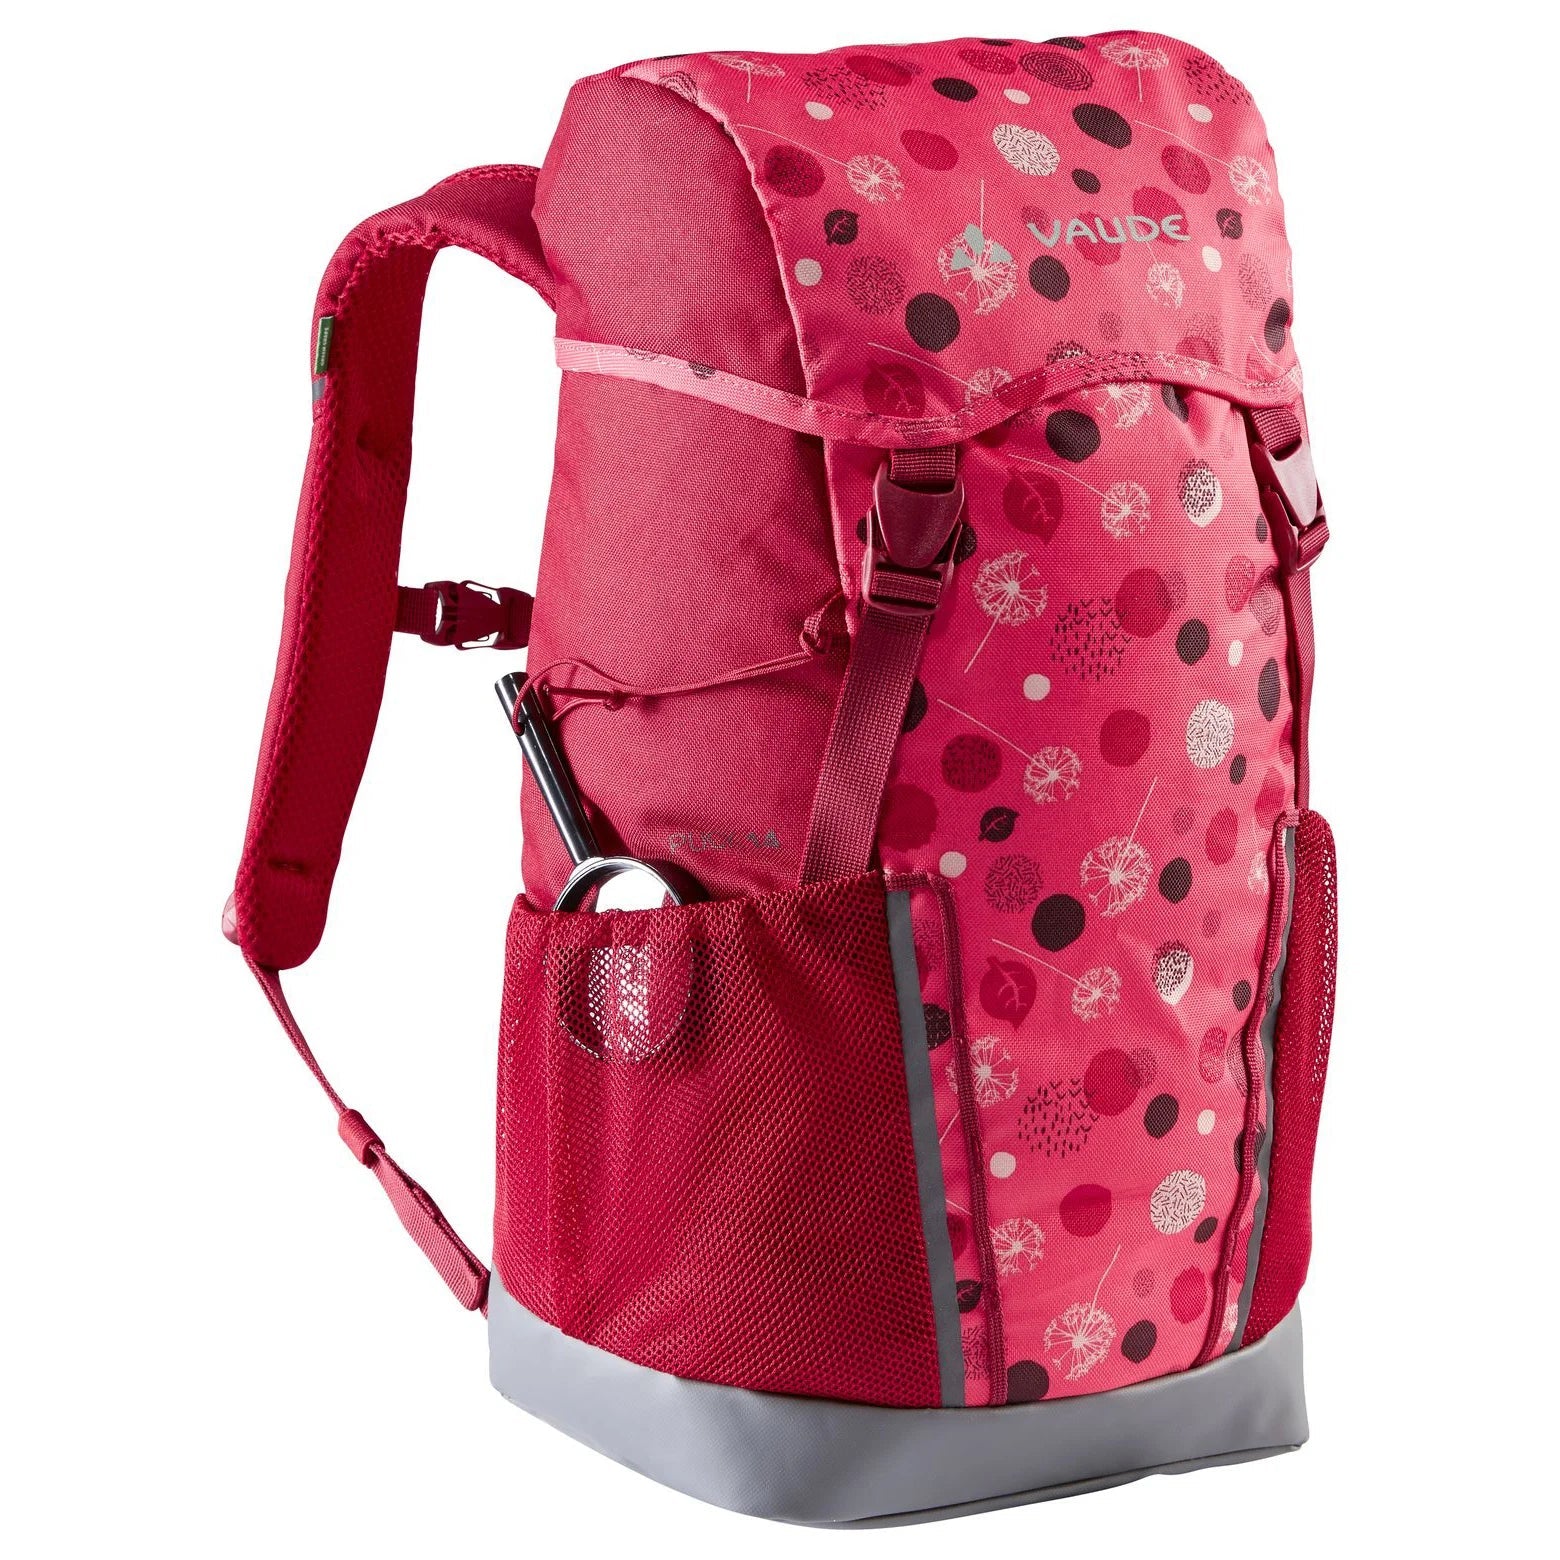 Vaude Family Puck 14 children's backpack 44 cm - bright pink-cranberry